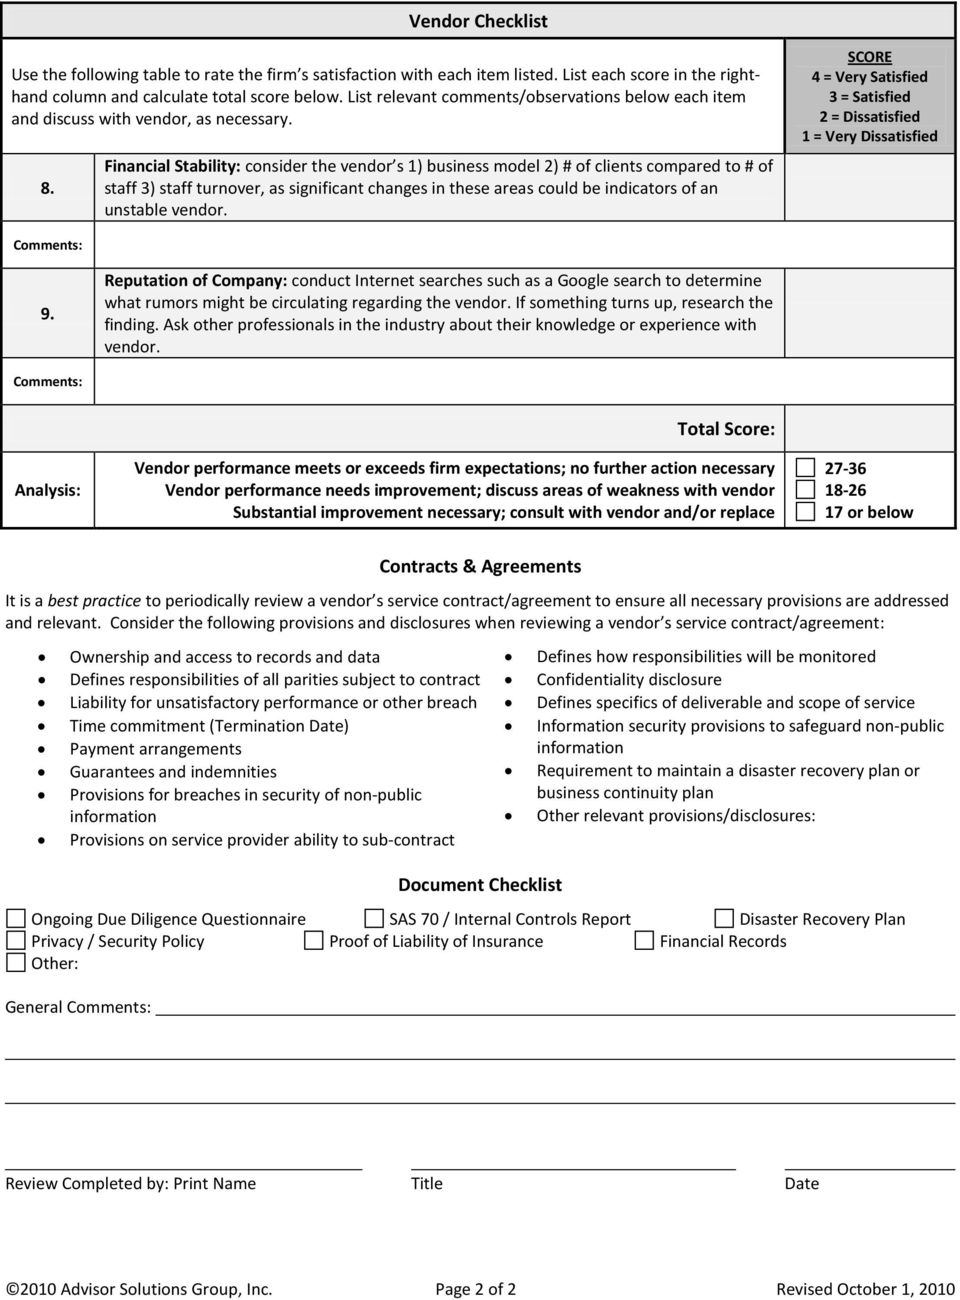 OUTSOURCING DUE DILIGENCE FORM - PDF Free Download Throughout Vendor Due Diligence Report Template